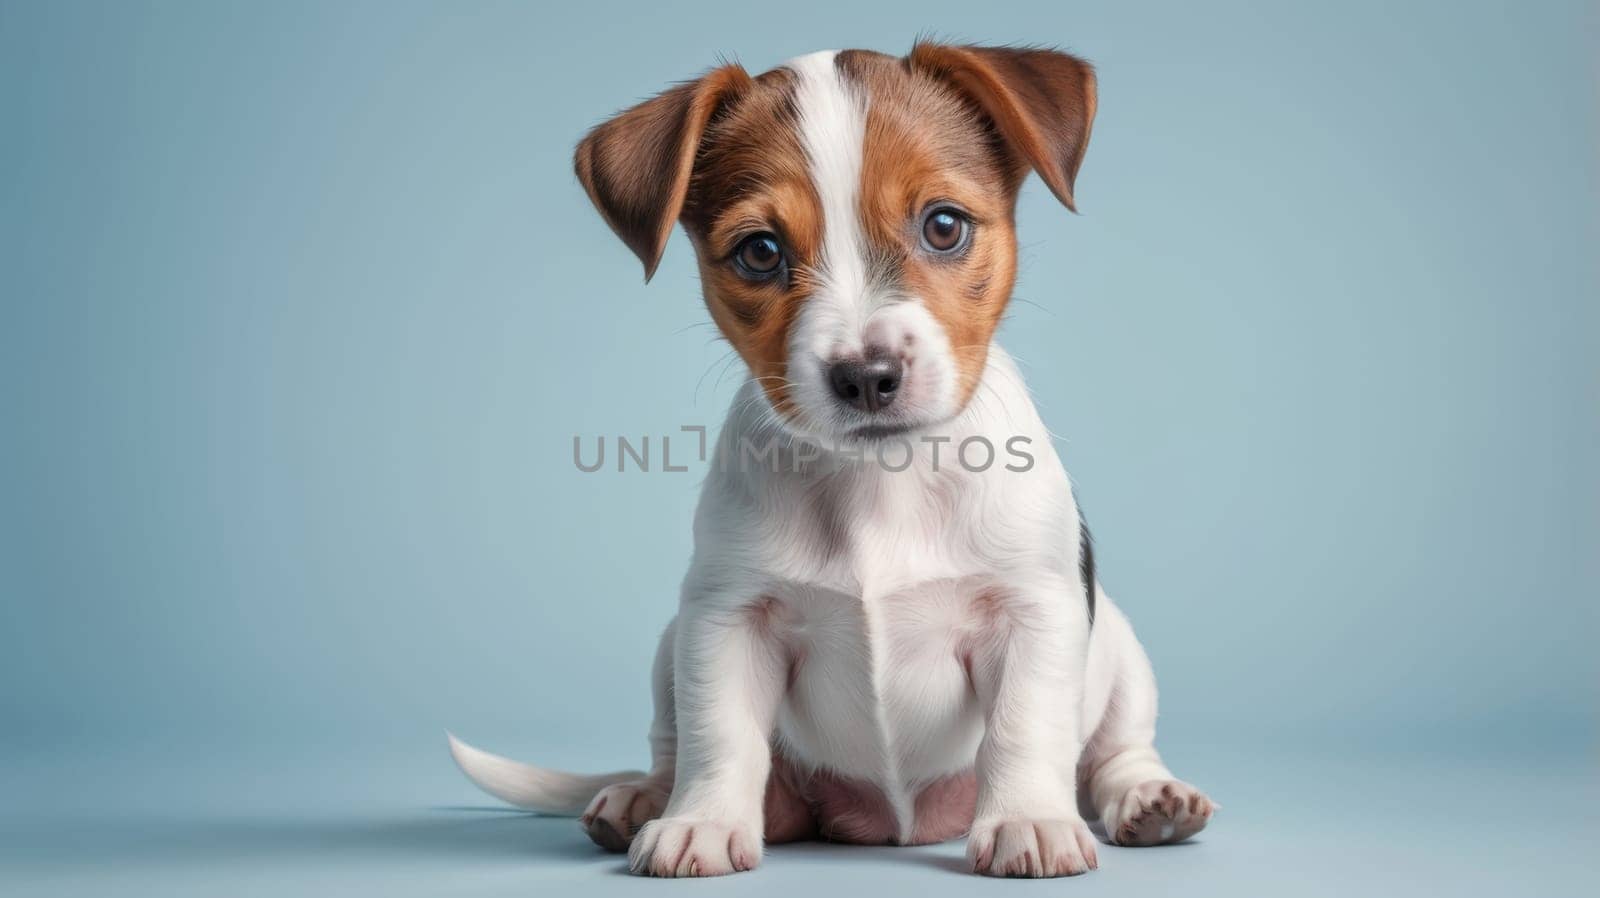 Funny Jack Russell puppy on a blue background by Ekaterina34